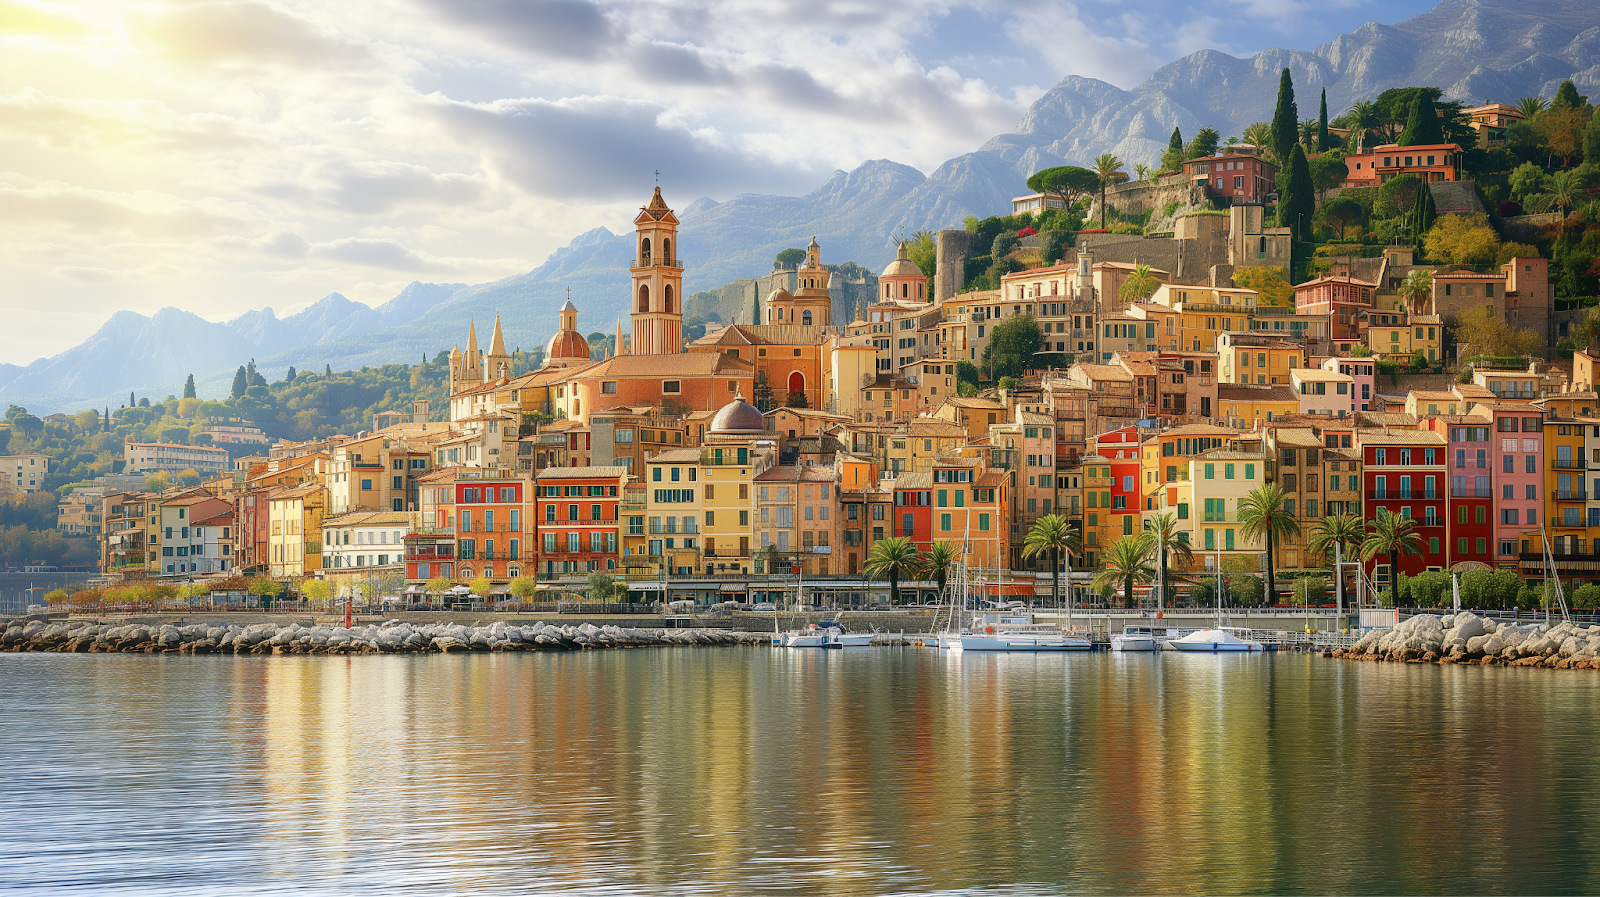 Charming old town of Menton and the serene Mediterranean coastline.